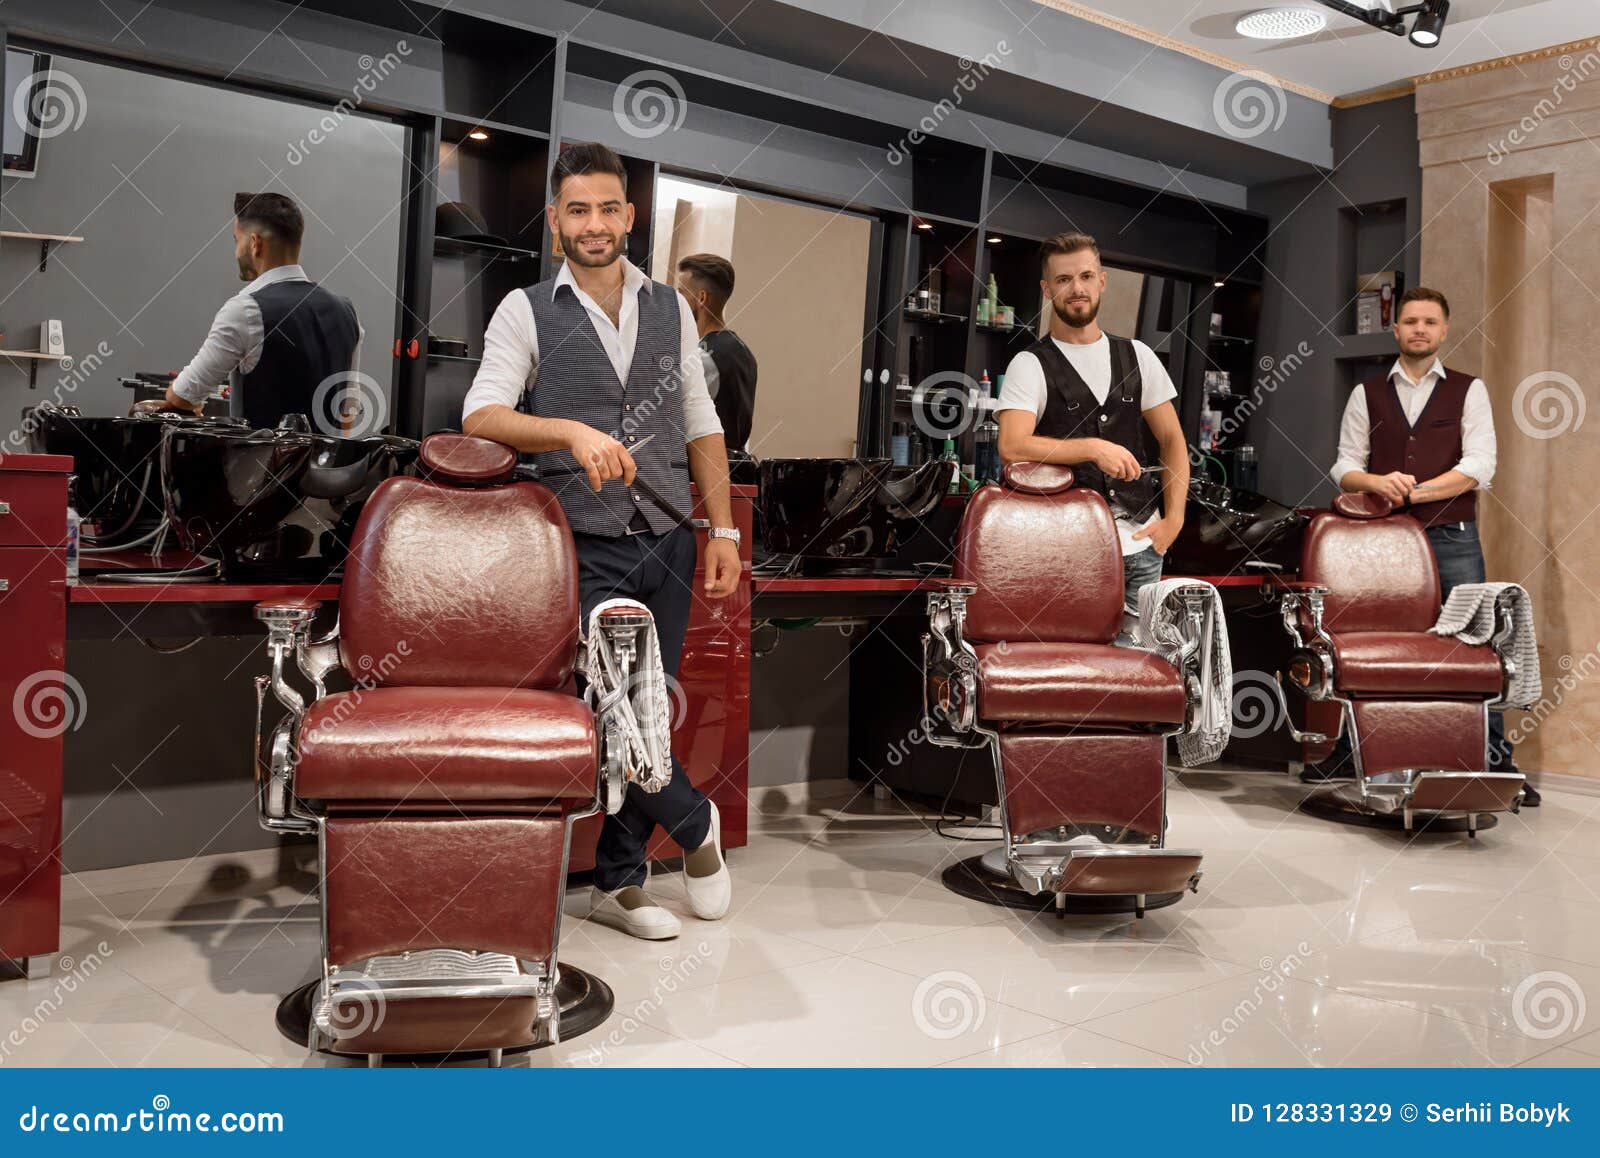 Confident Masters Barbers Standing Near Hairdresser Chairs And